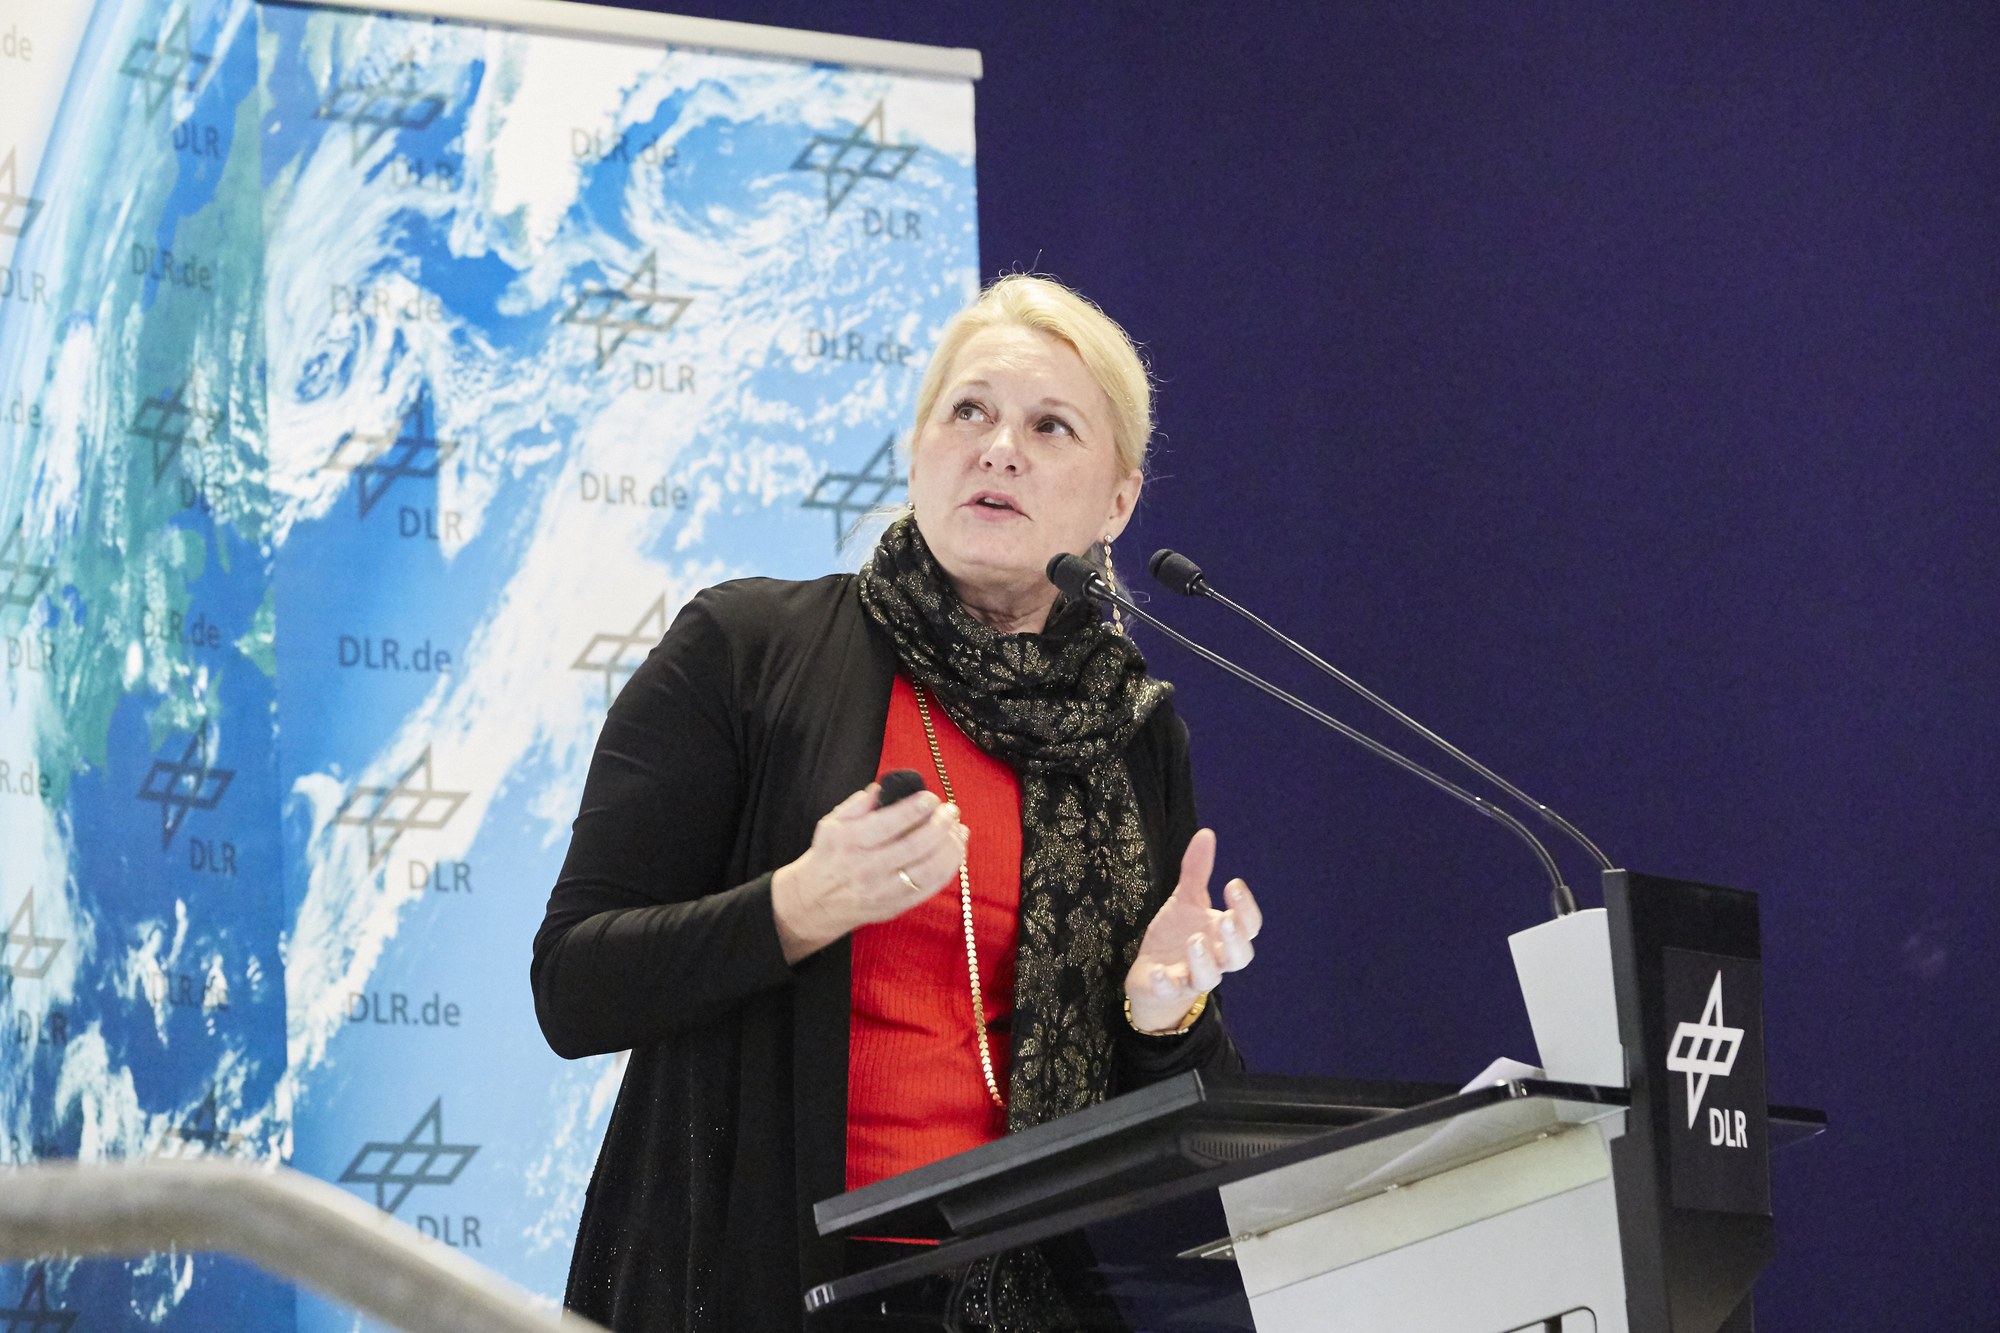 Pascale Ehrenfreund, Chair of the DLR Executive Board